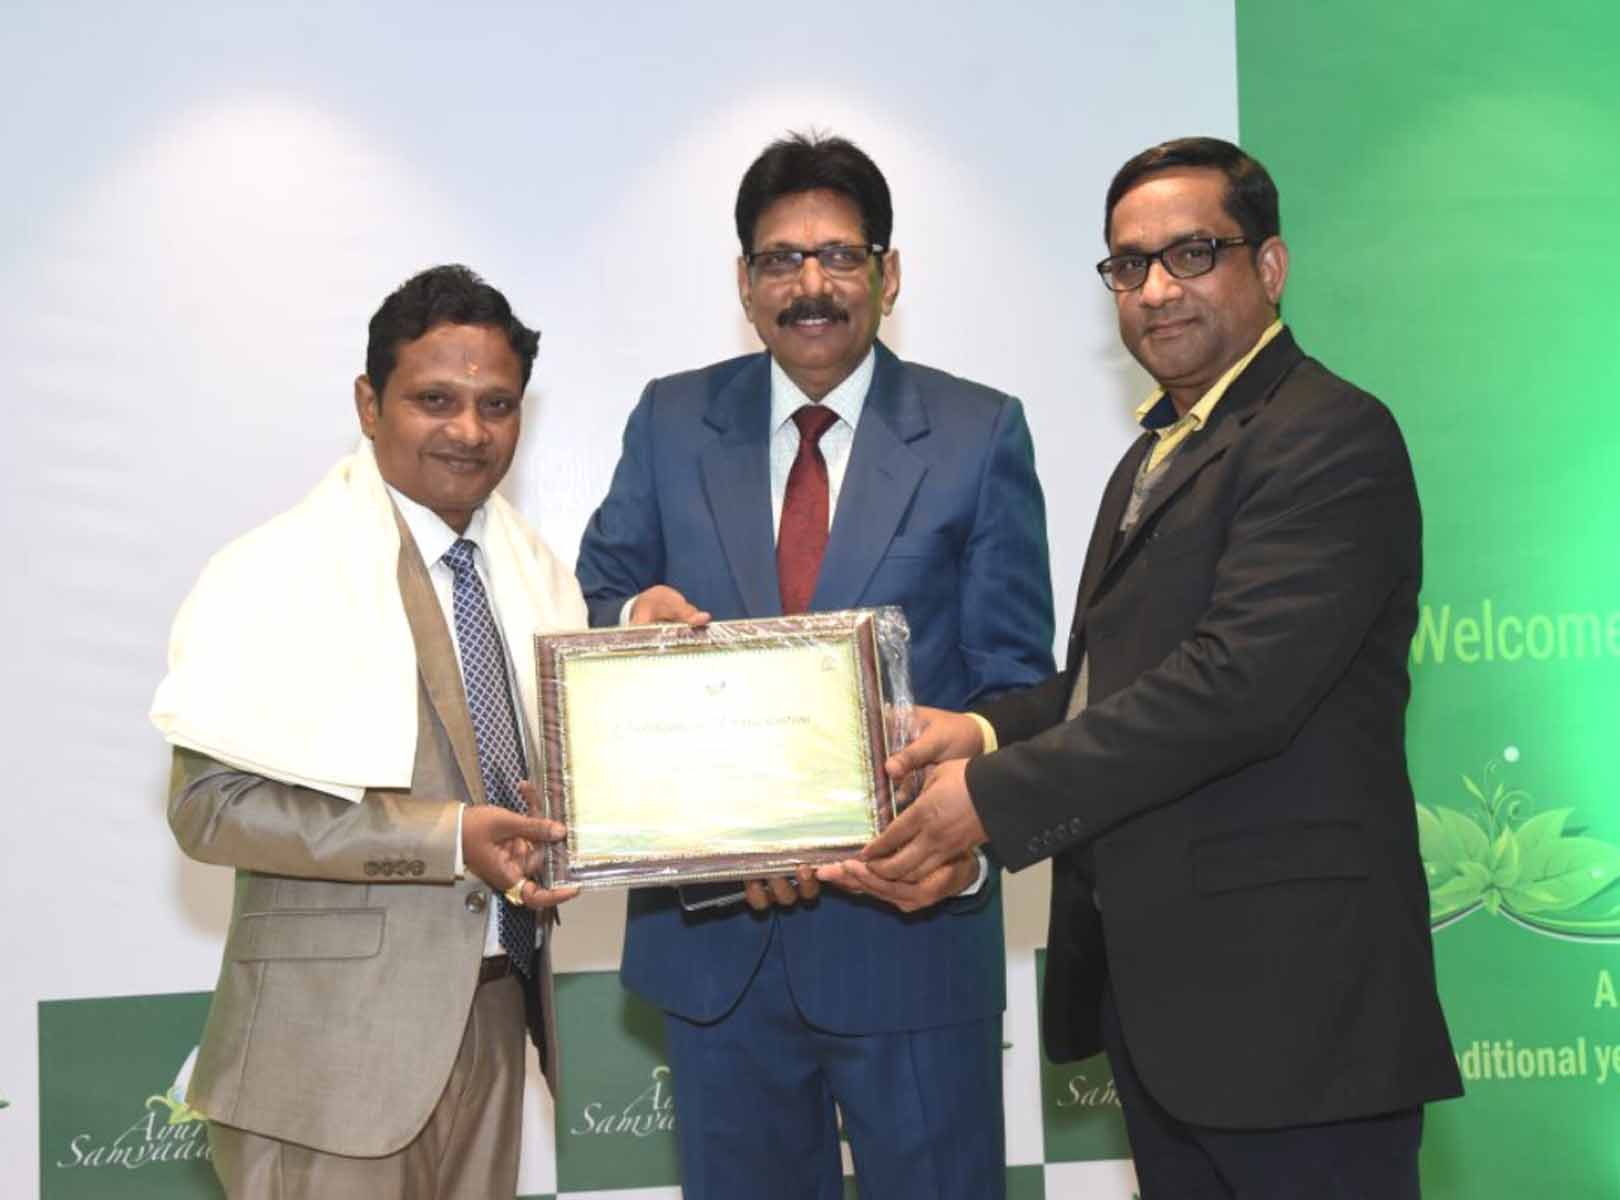 Achieving Award of Dr. Bk kashyap